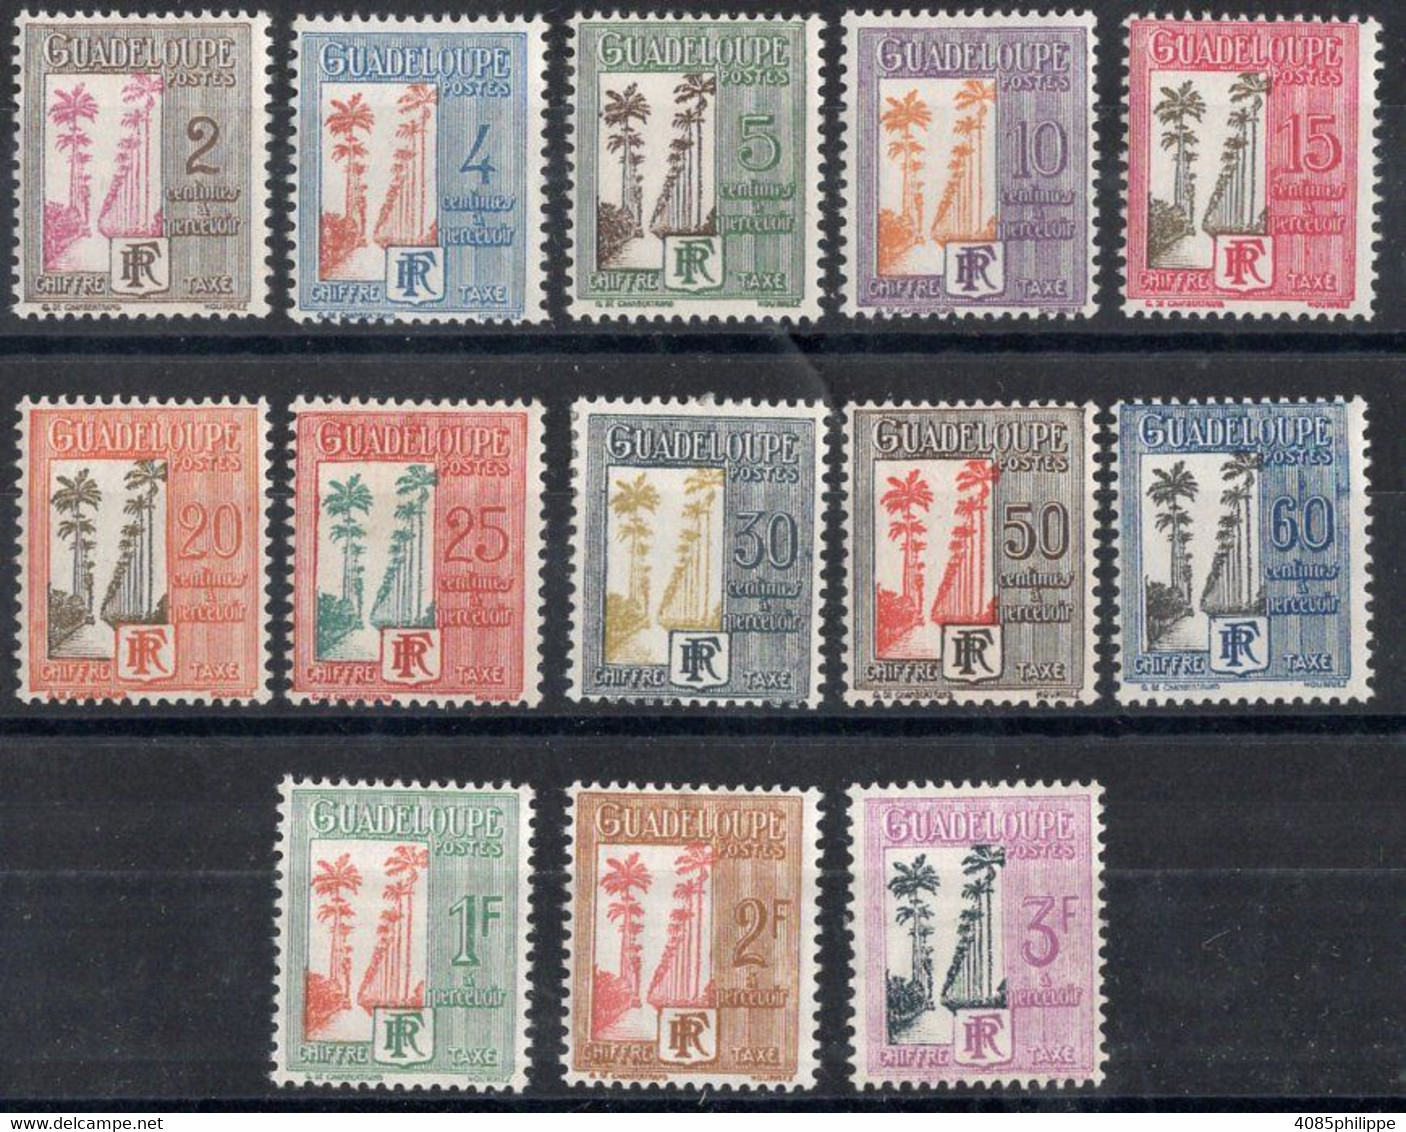 Guadeloupe Timbres-Taxe N°25* à 36* & 37(*)  Neufs Charnières TB Cote 15€00 - Timbres-taxe